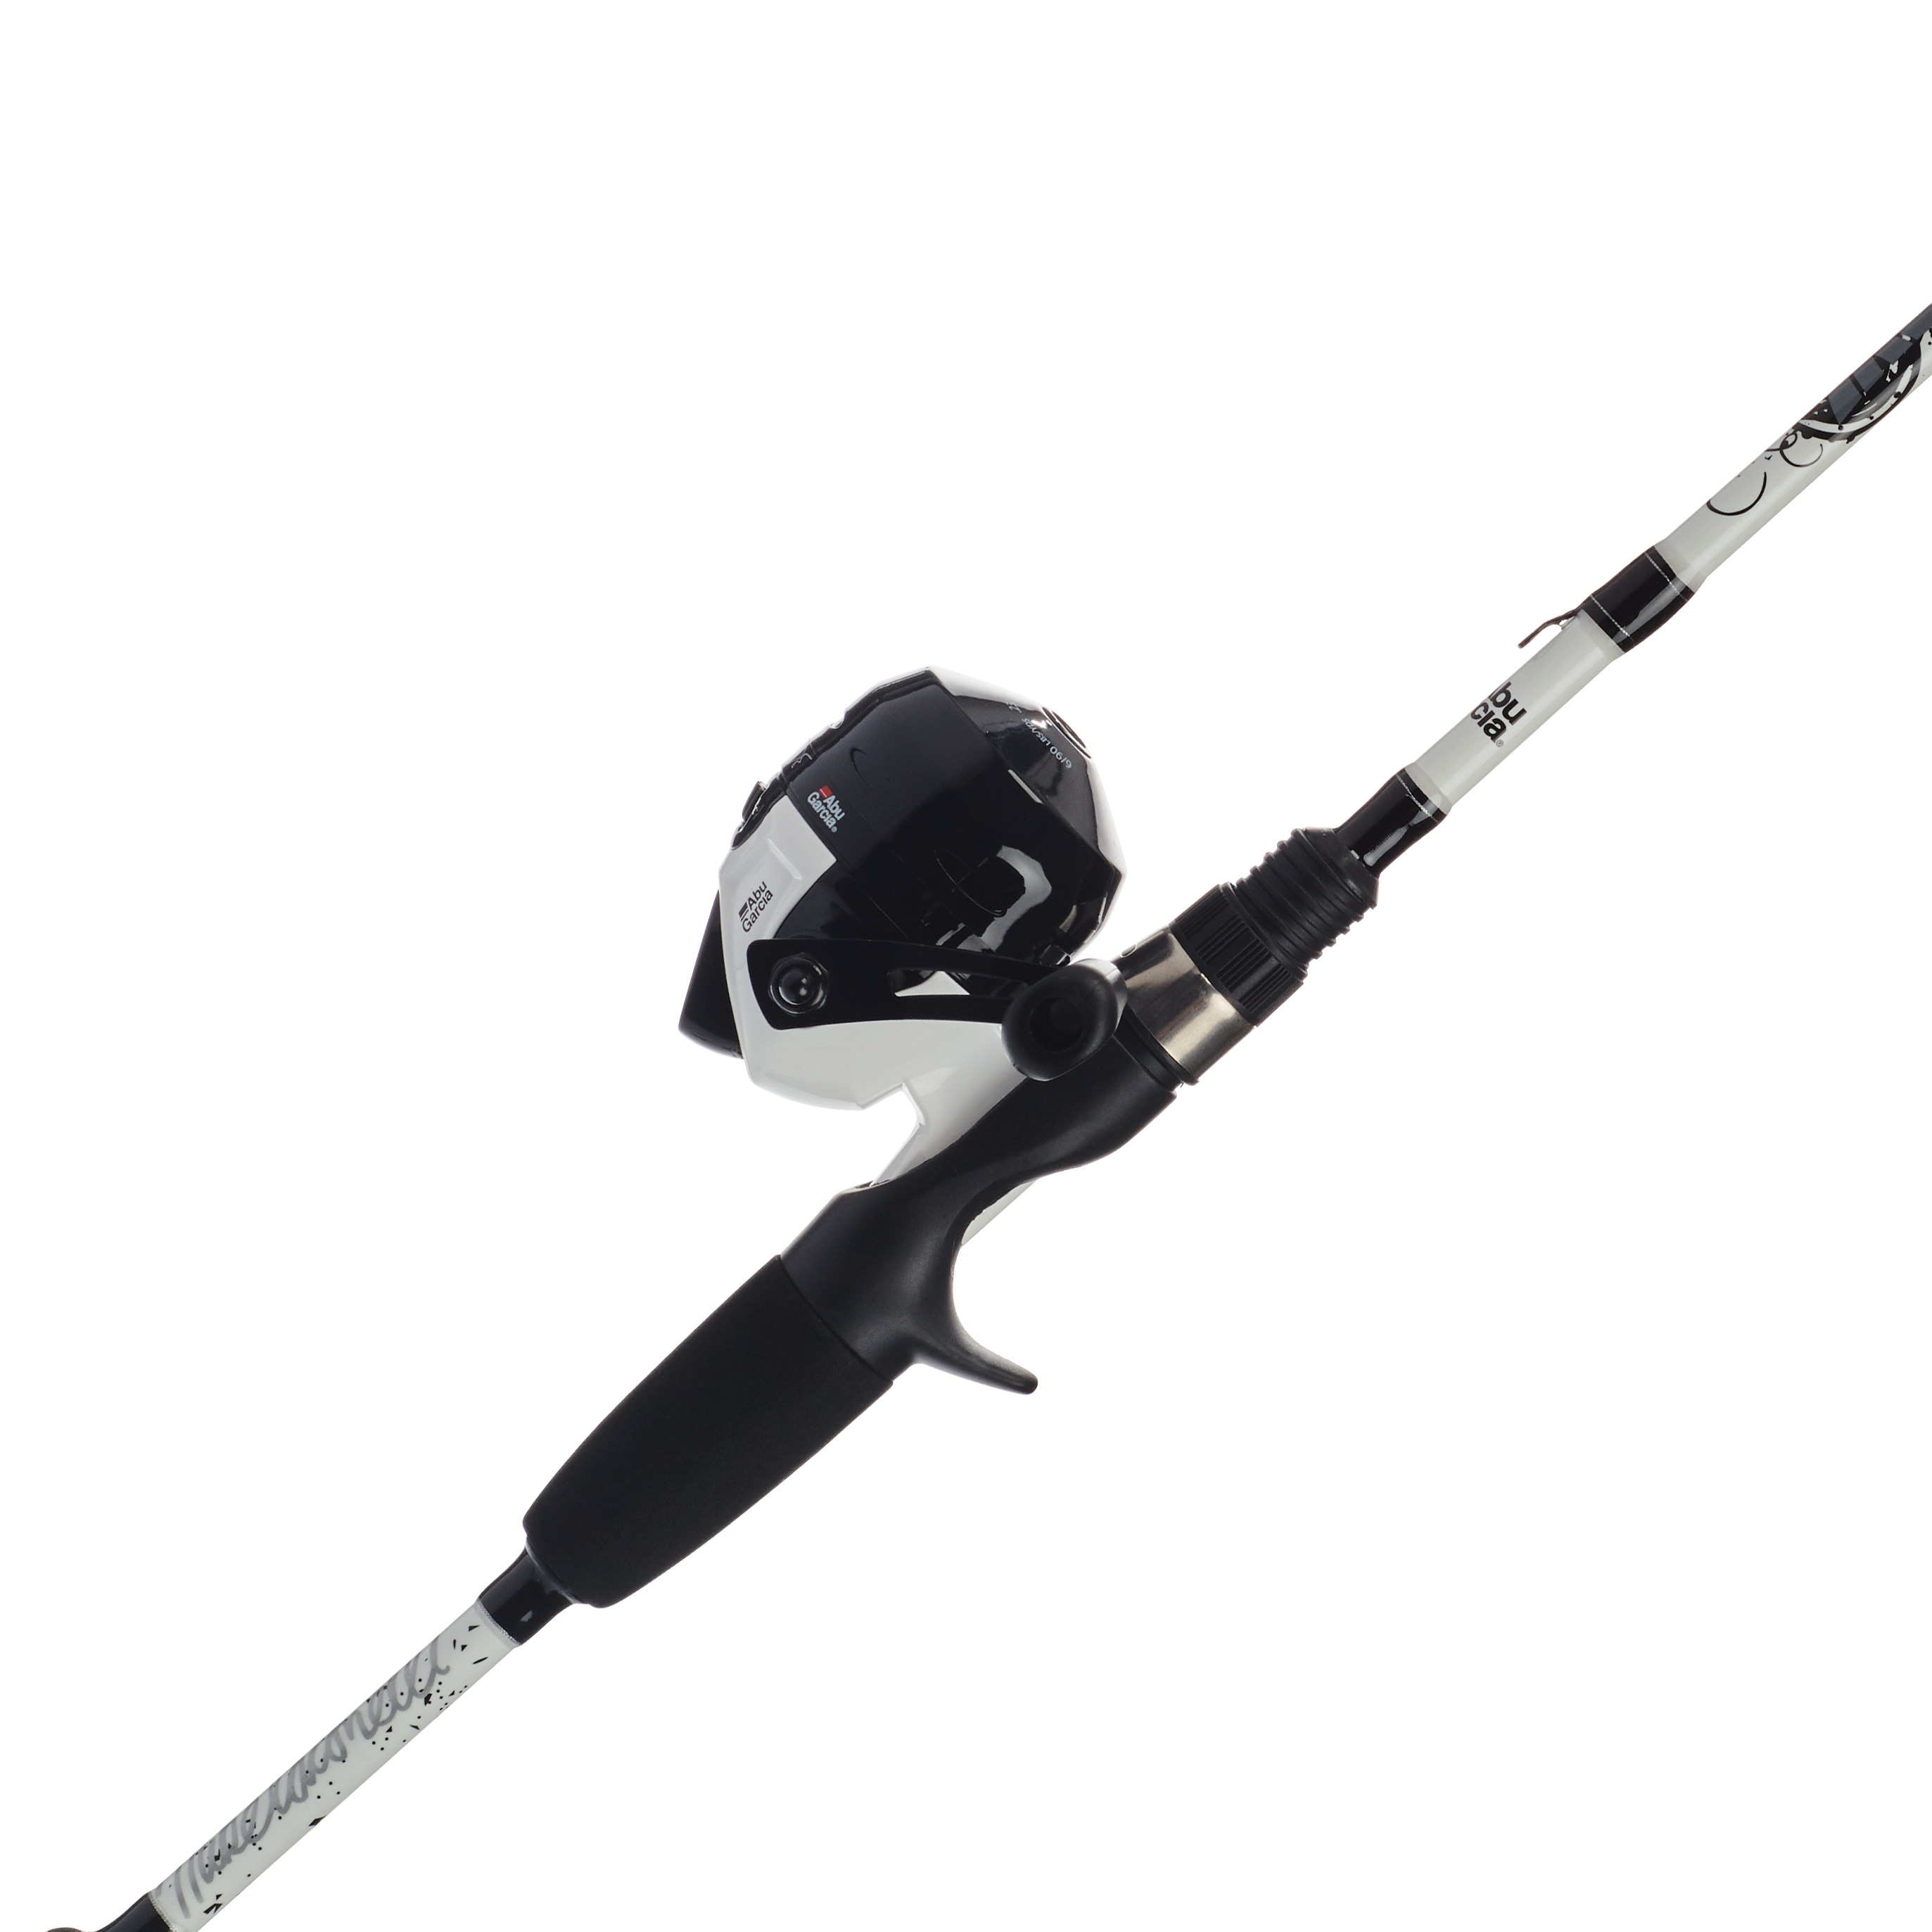 https://op2.0ps.us/original/opplanet-abu-garcia-ike-dude-spincast-combo-3-0-1-right-6-5ft-6in-rod-length-medium-power-fast-action-2-pieces-rod-ike3sc6-562m-main